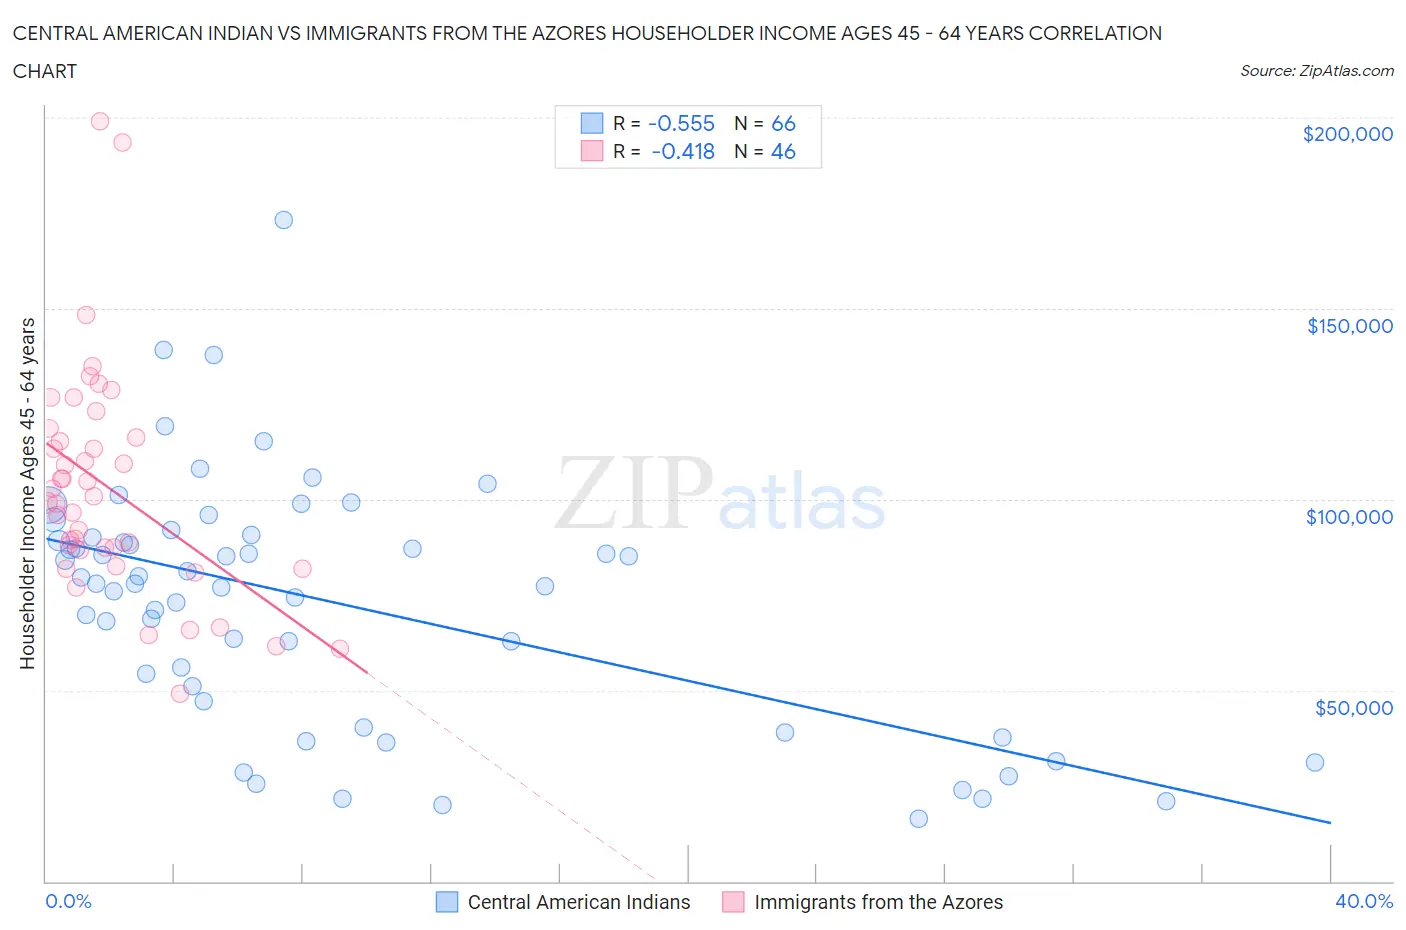 Central American Indian vs Immigrants from the Azores Householder Income Ages 45 - 64 years